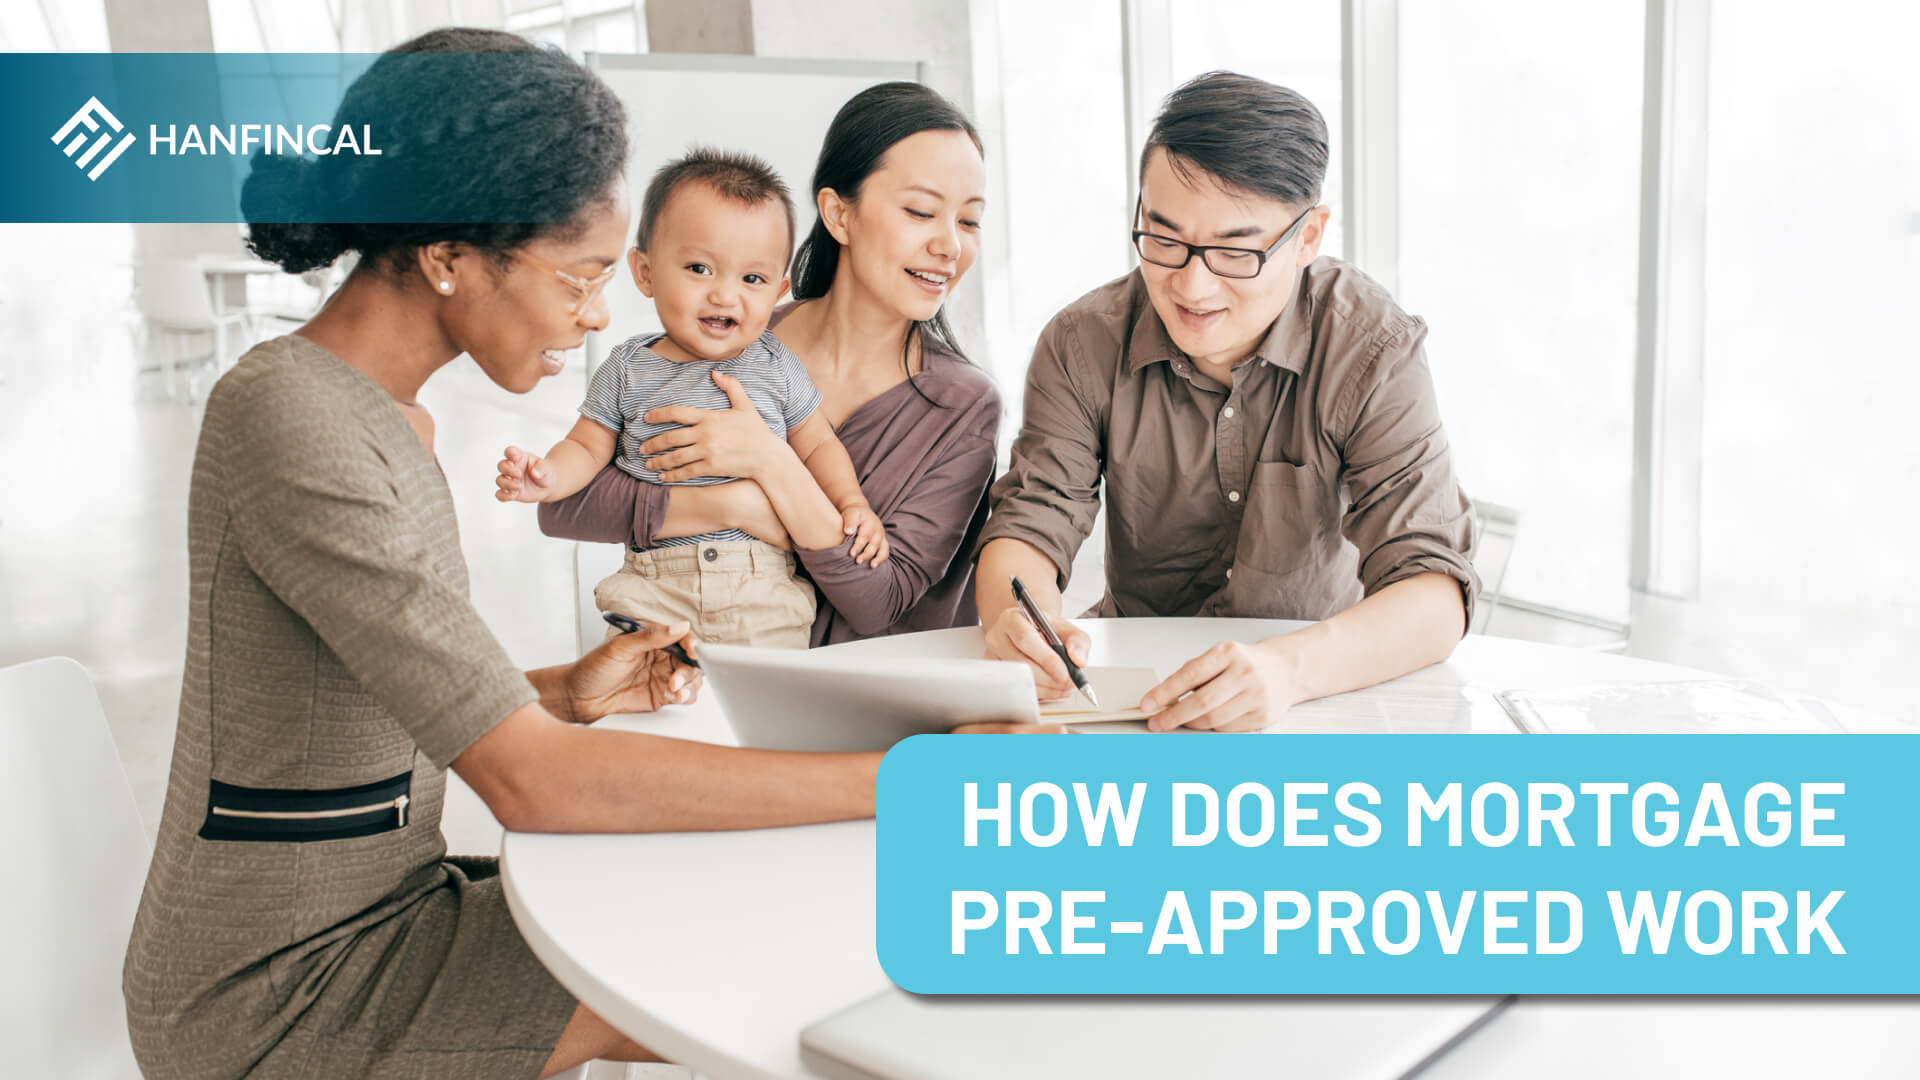 How does a mortgage pre-approved work?